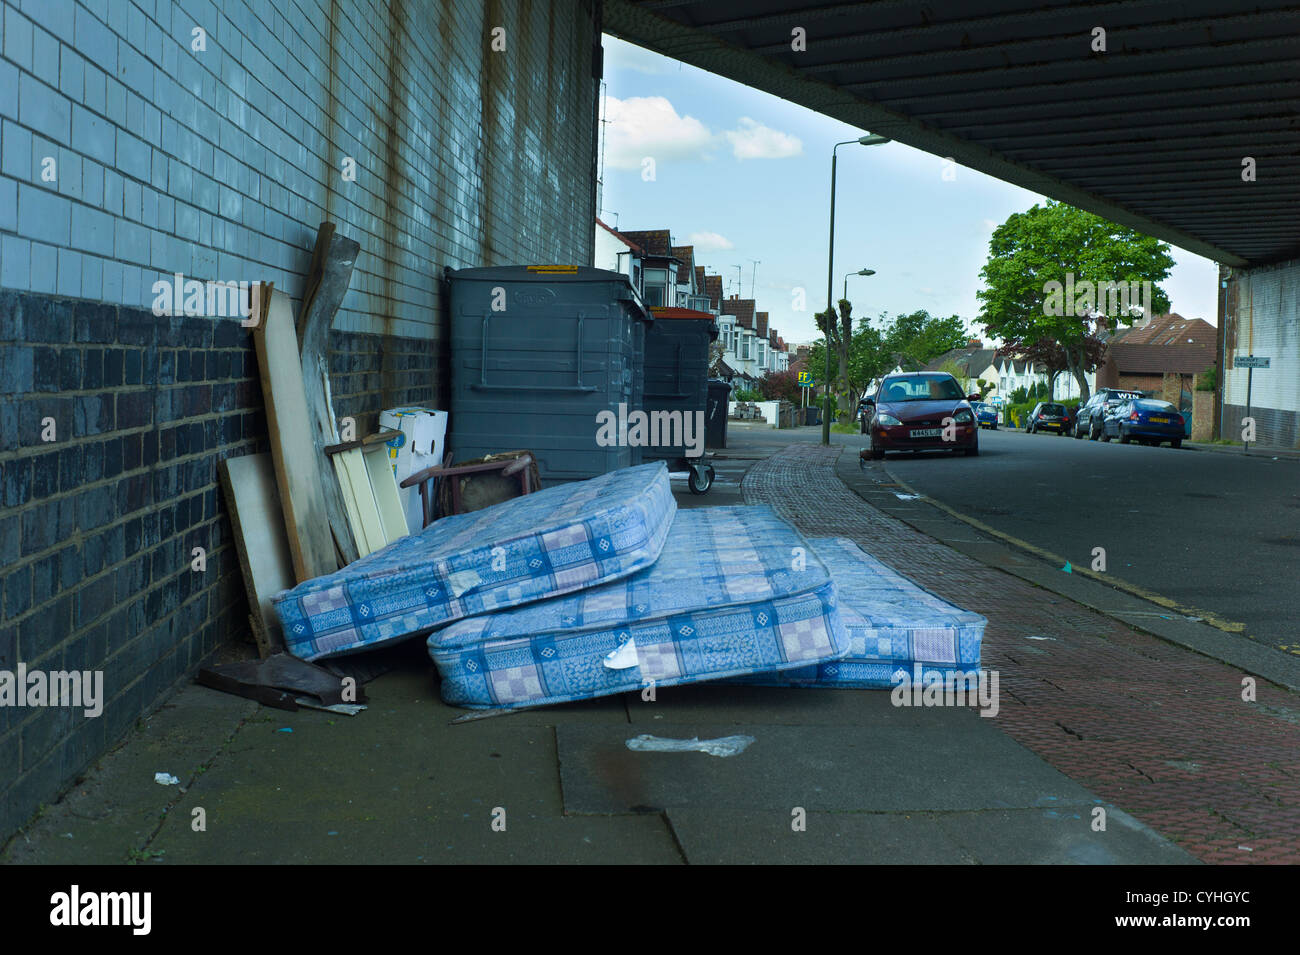 Fly tipping of rubbish and bed mattresses in residential road in Brent Cross Golders Green, London Stock Photo